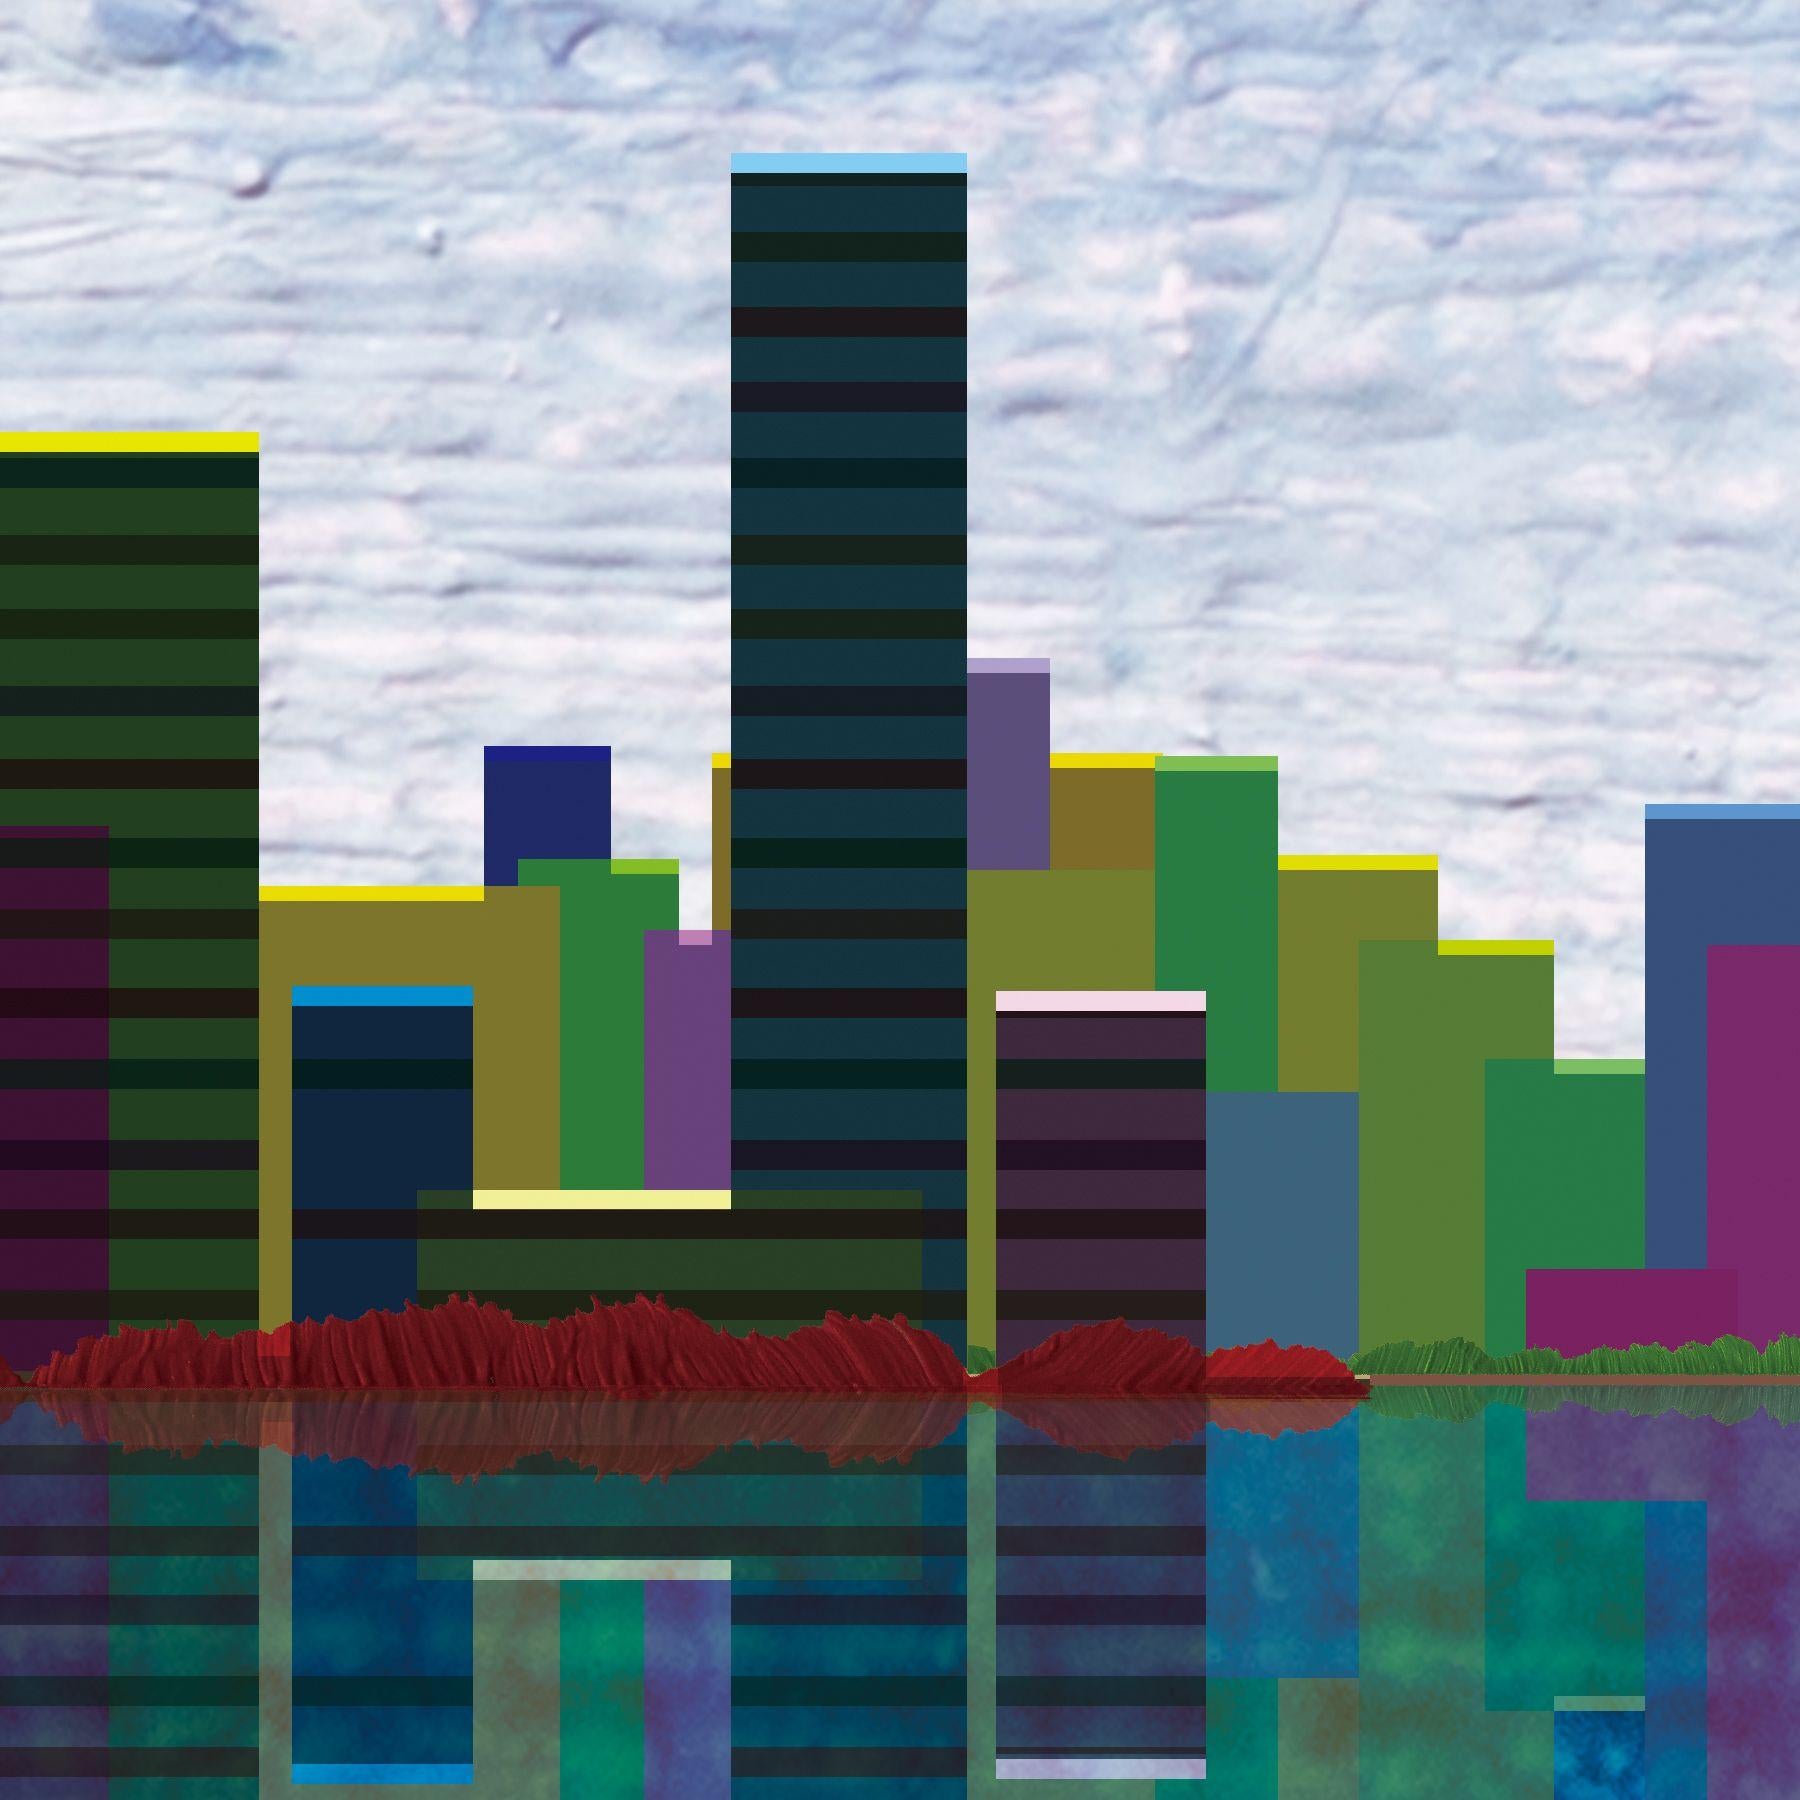 Cityscape_Skyline, Digital on Metal - Other Art Style Print by Decheng Cui